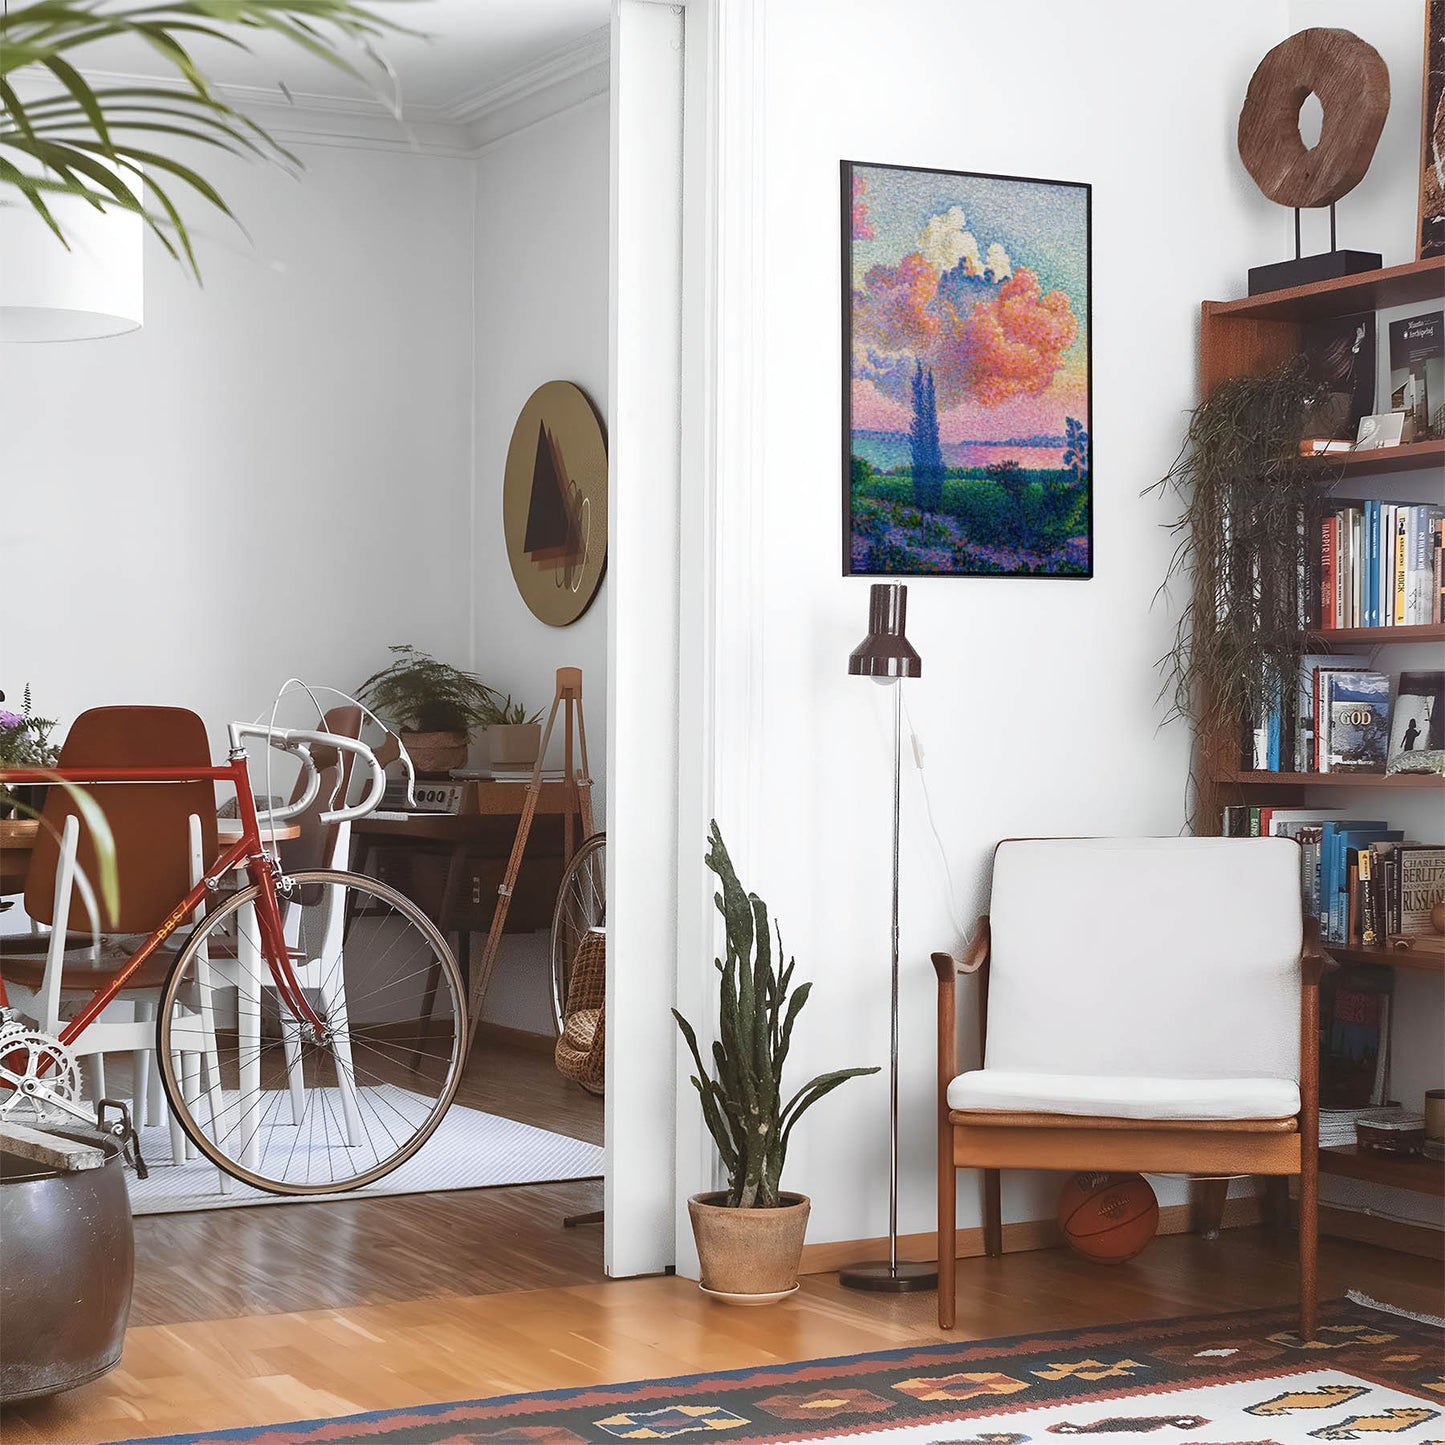 Eclectic living room with a road bike, bookshelf and house plants that features framed artwork of a Beautiful Light Pink Sunset above a chair and lamp